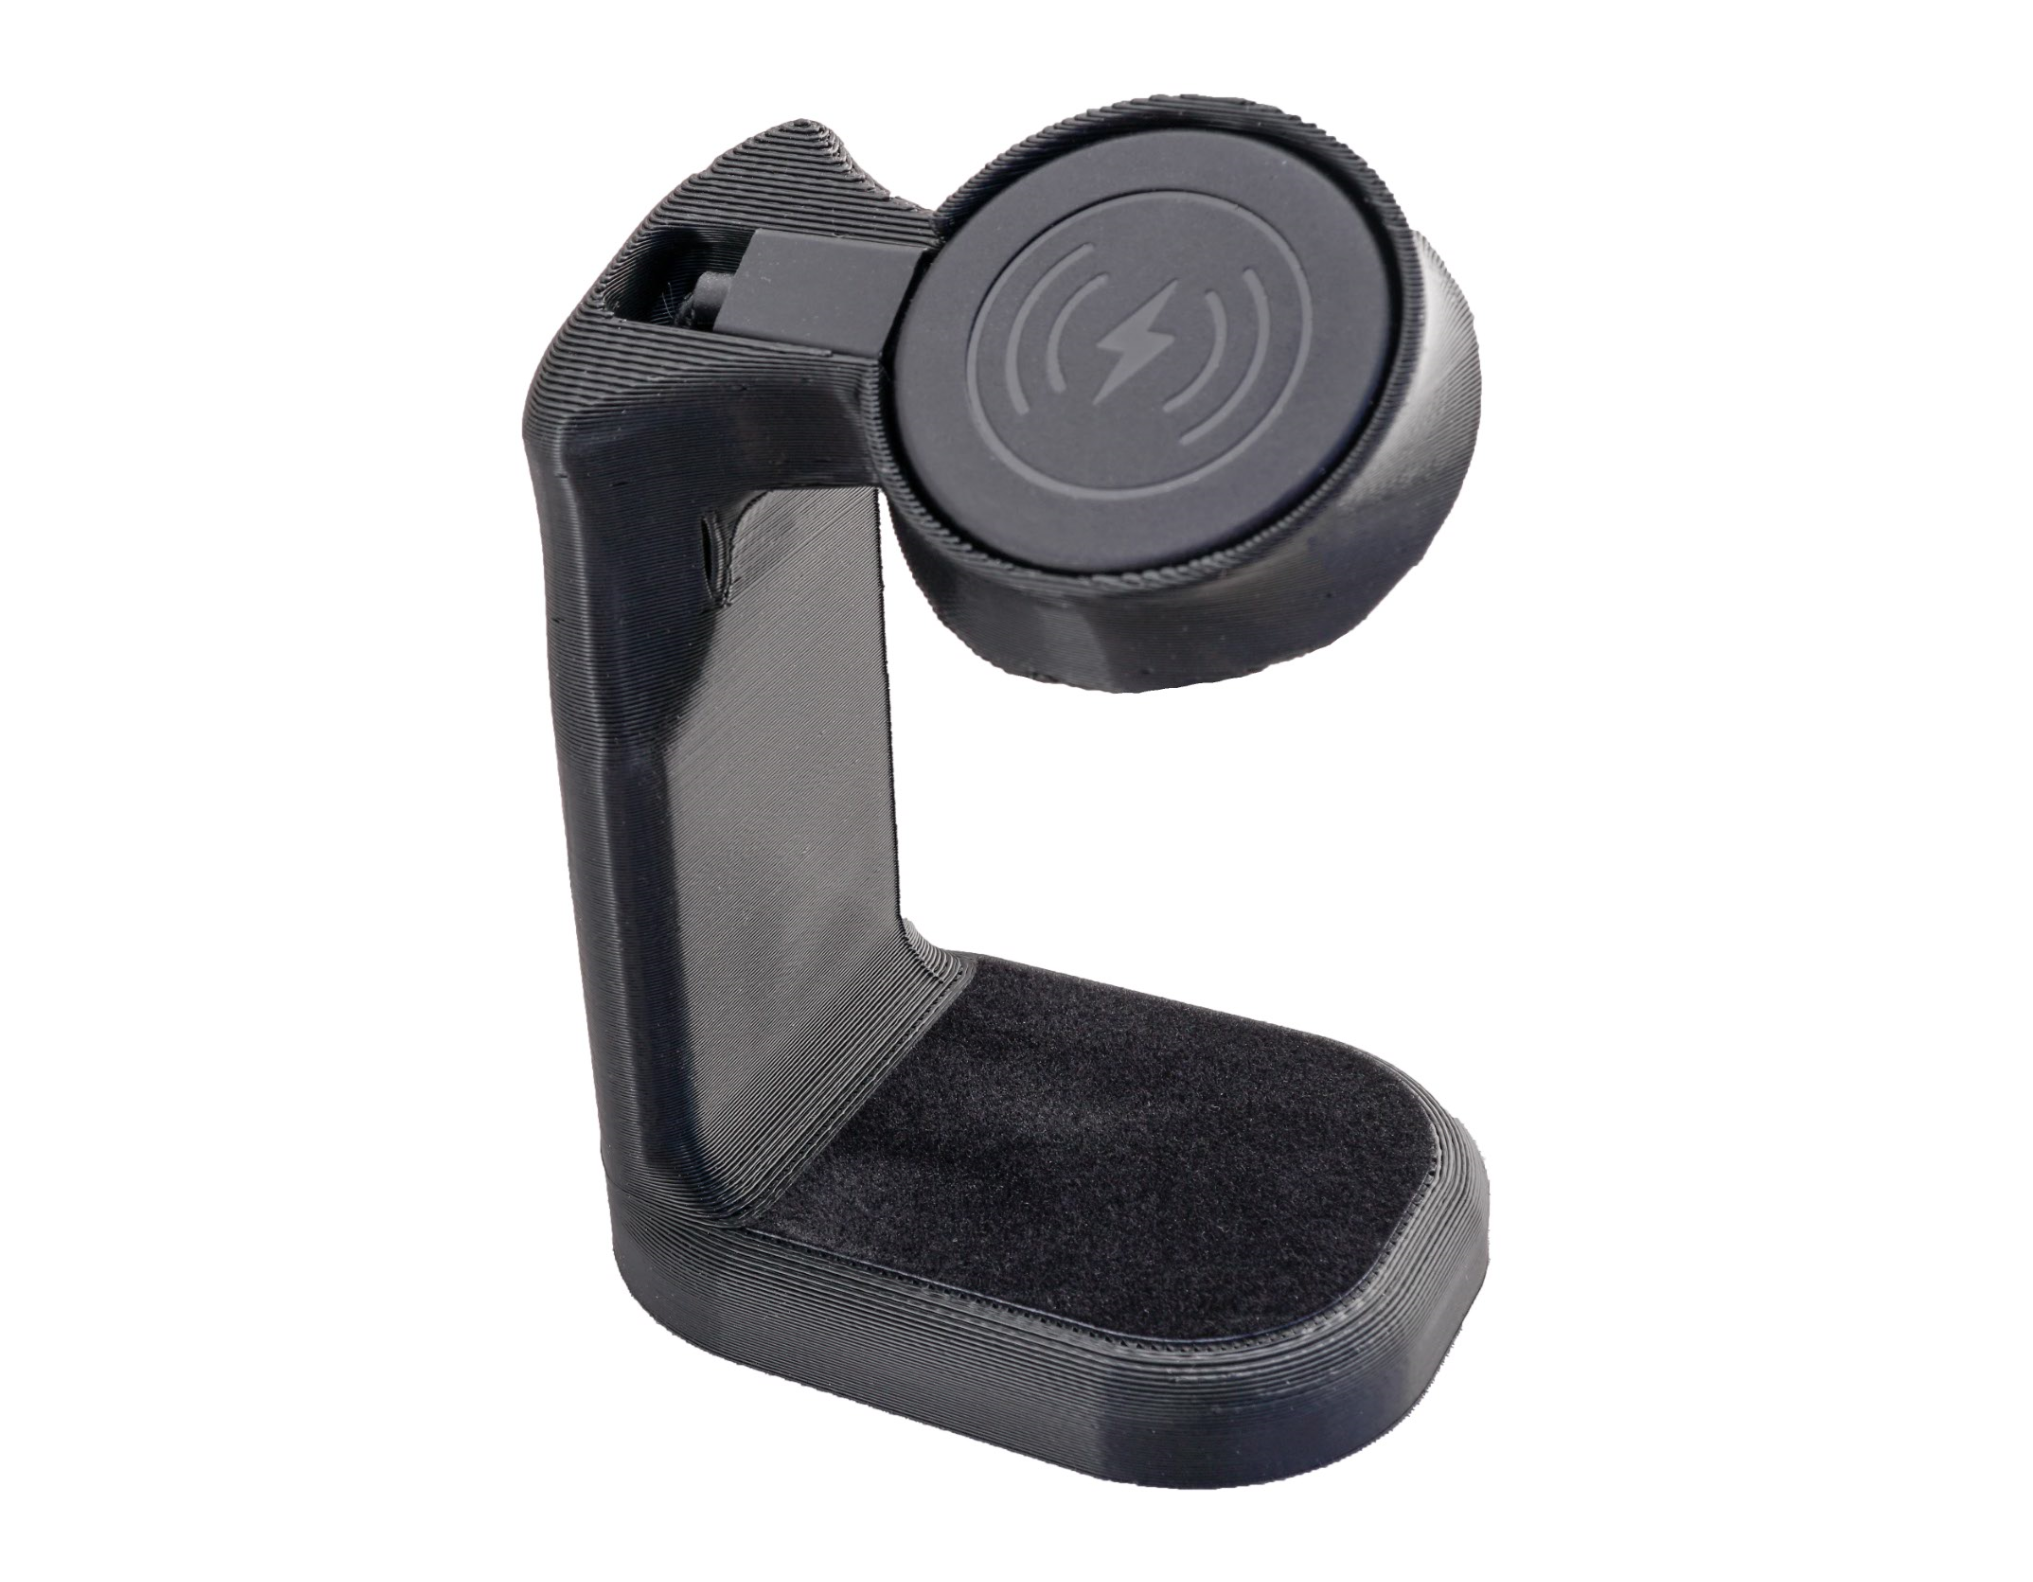 Louis Vuitton Tambour 1 and 2 Smartwatch Charging Stand